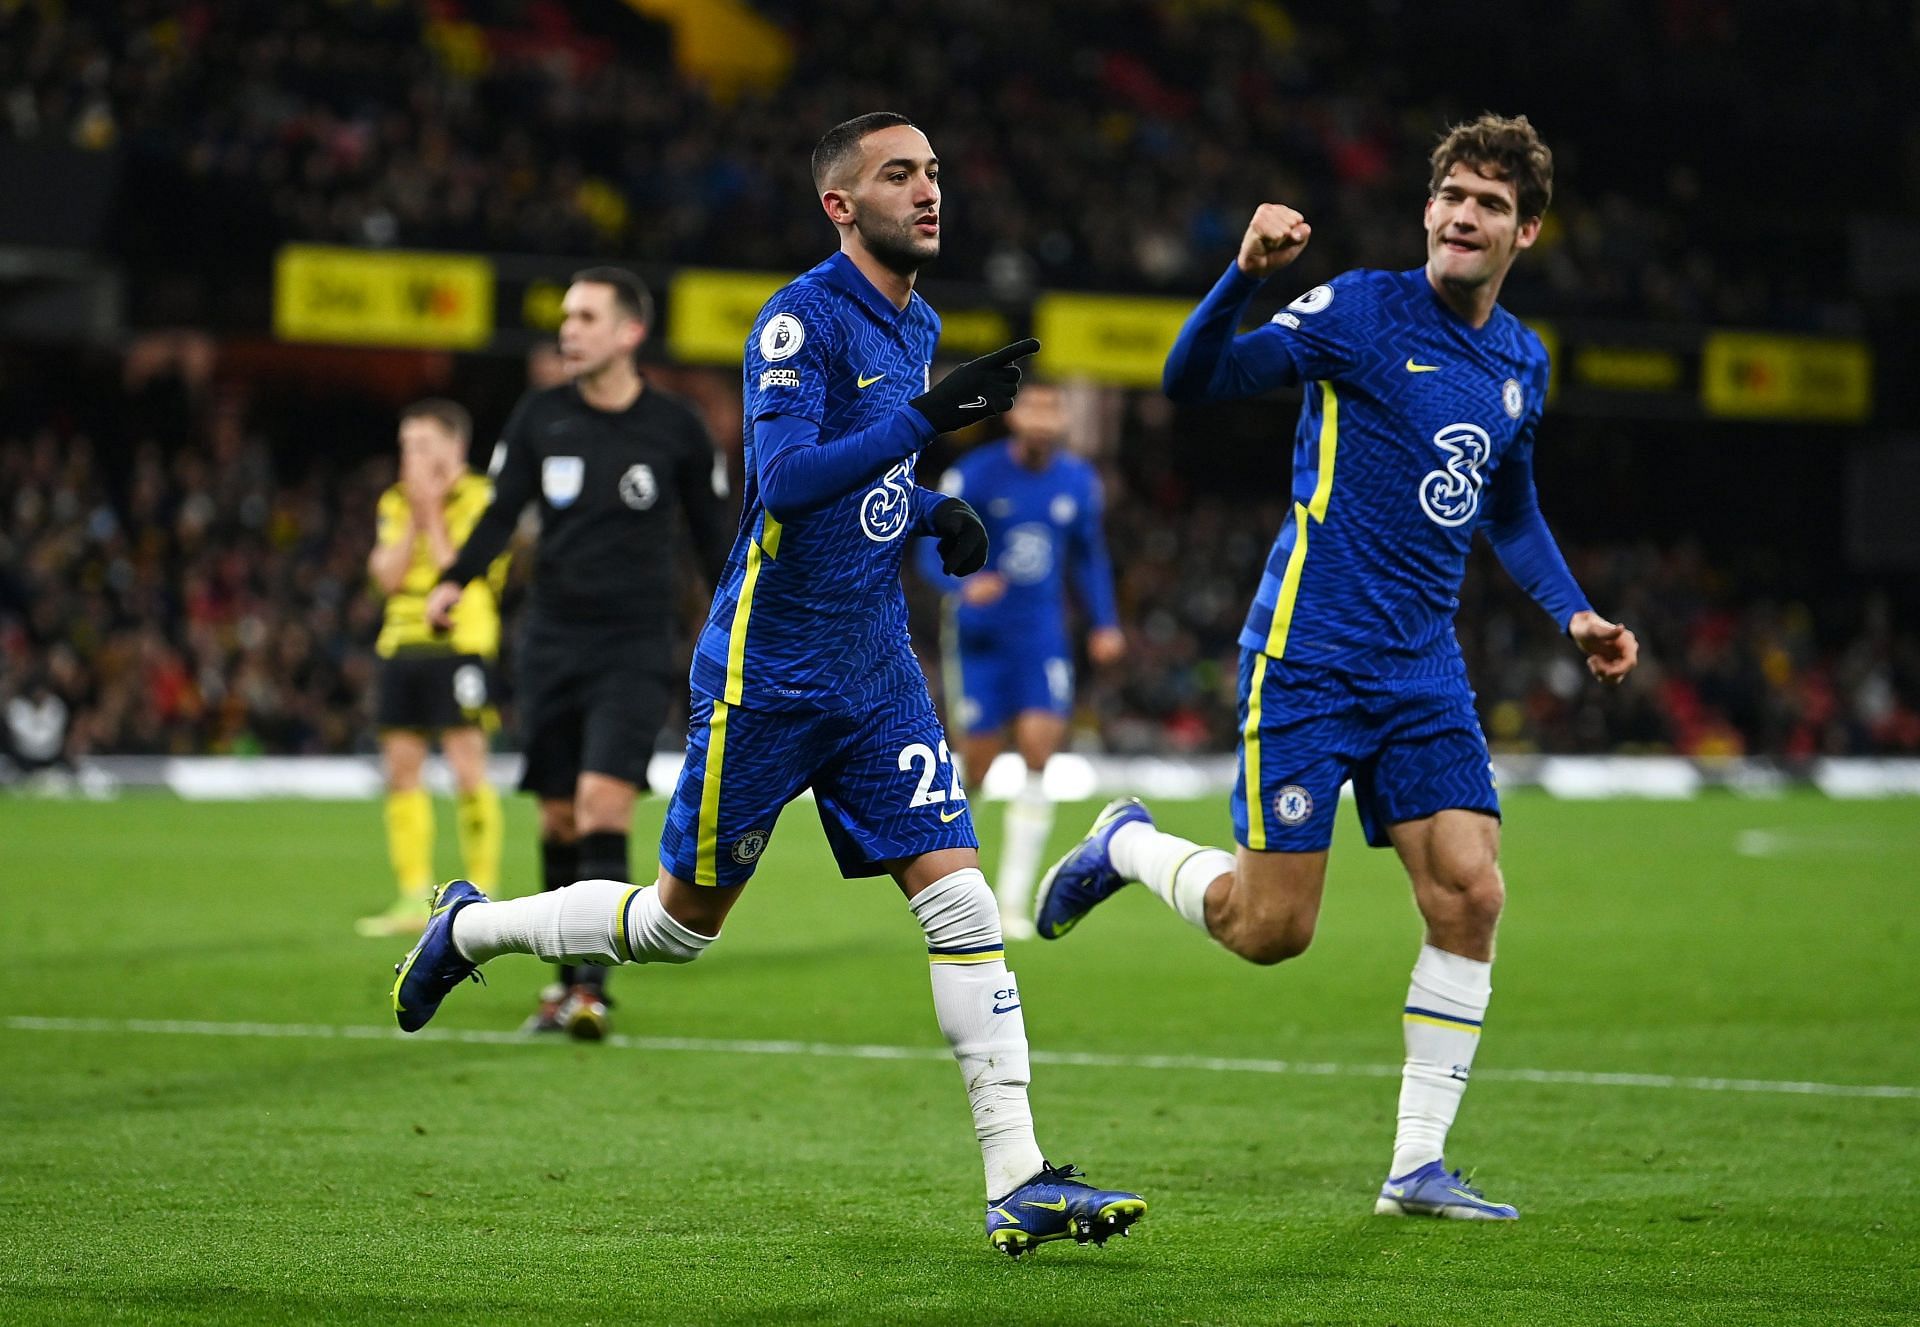 Chelsea recently defeated Watford 2-1 in the Premier League